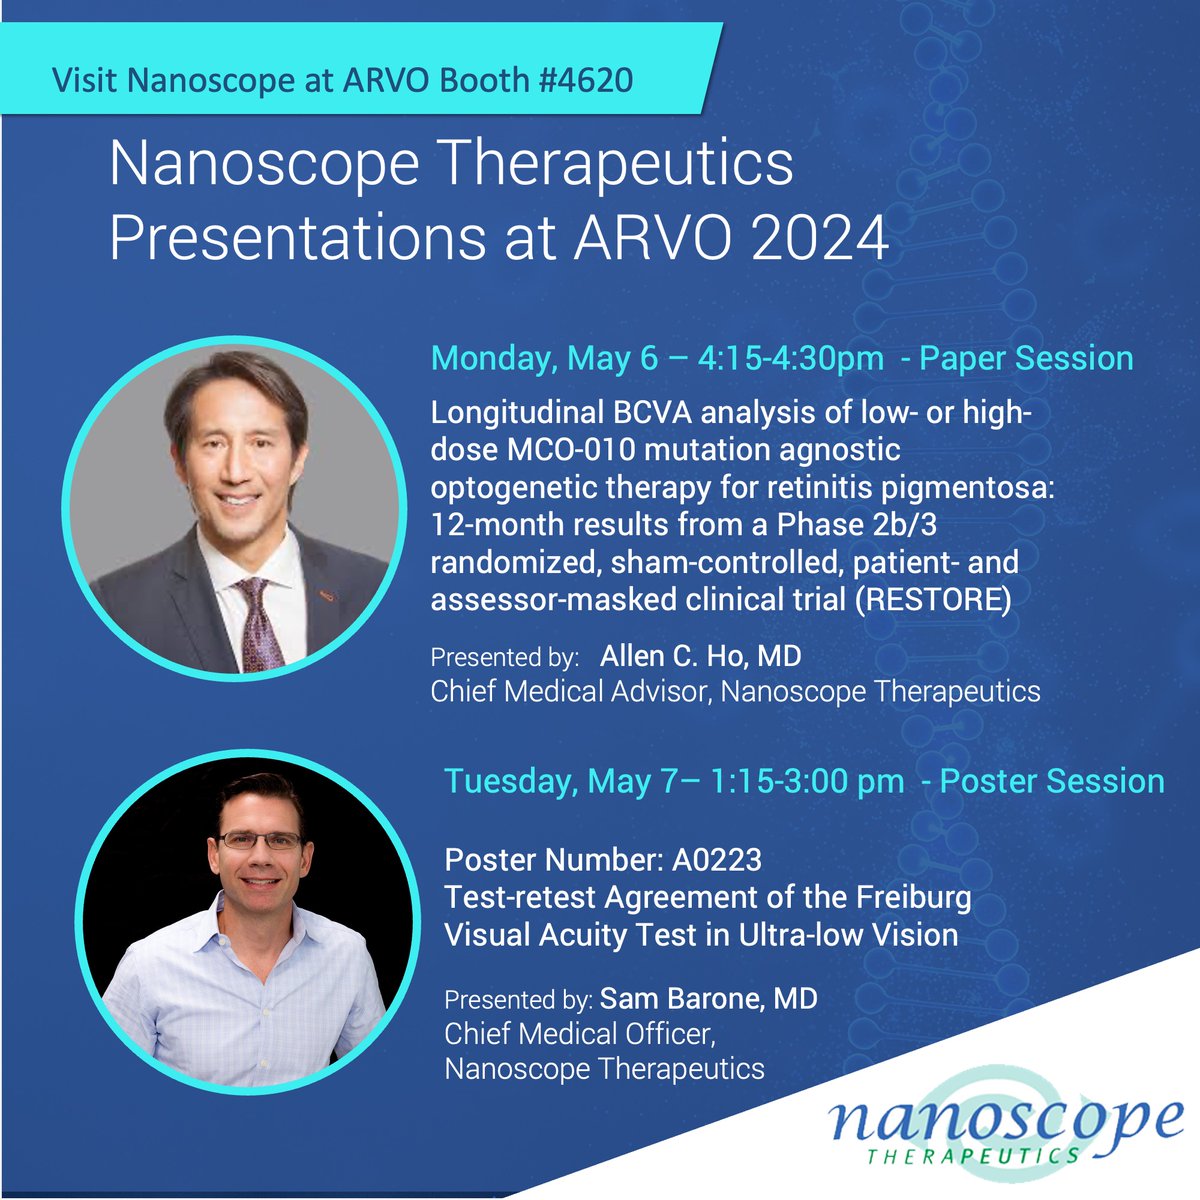 @NSTherapeutics MCO-010 #genetherapy is featured in 6 presentations at #ARVO24 beginning Mon. 5/6 when Dr. Allen C. Ho presents 12-month results from our RESTORE trial for #retinitispigmentosa. Hope to see you there and connect at our booth #4620. #ophthalmology @OISTWEETS